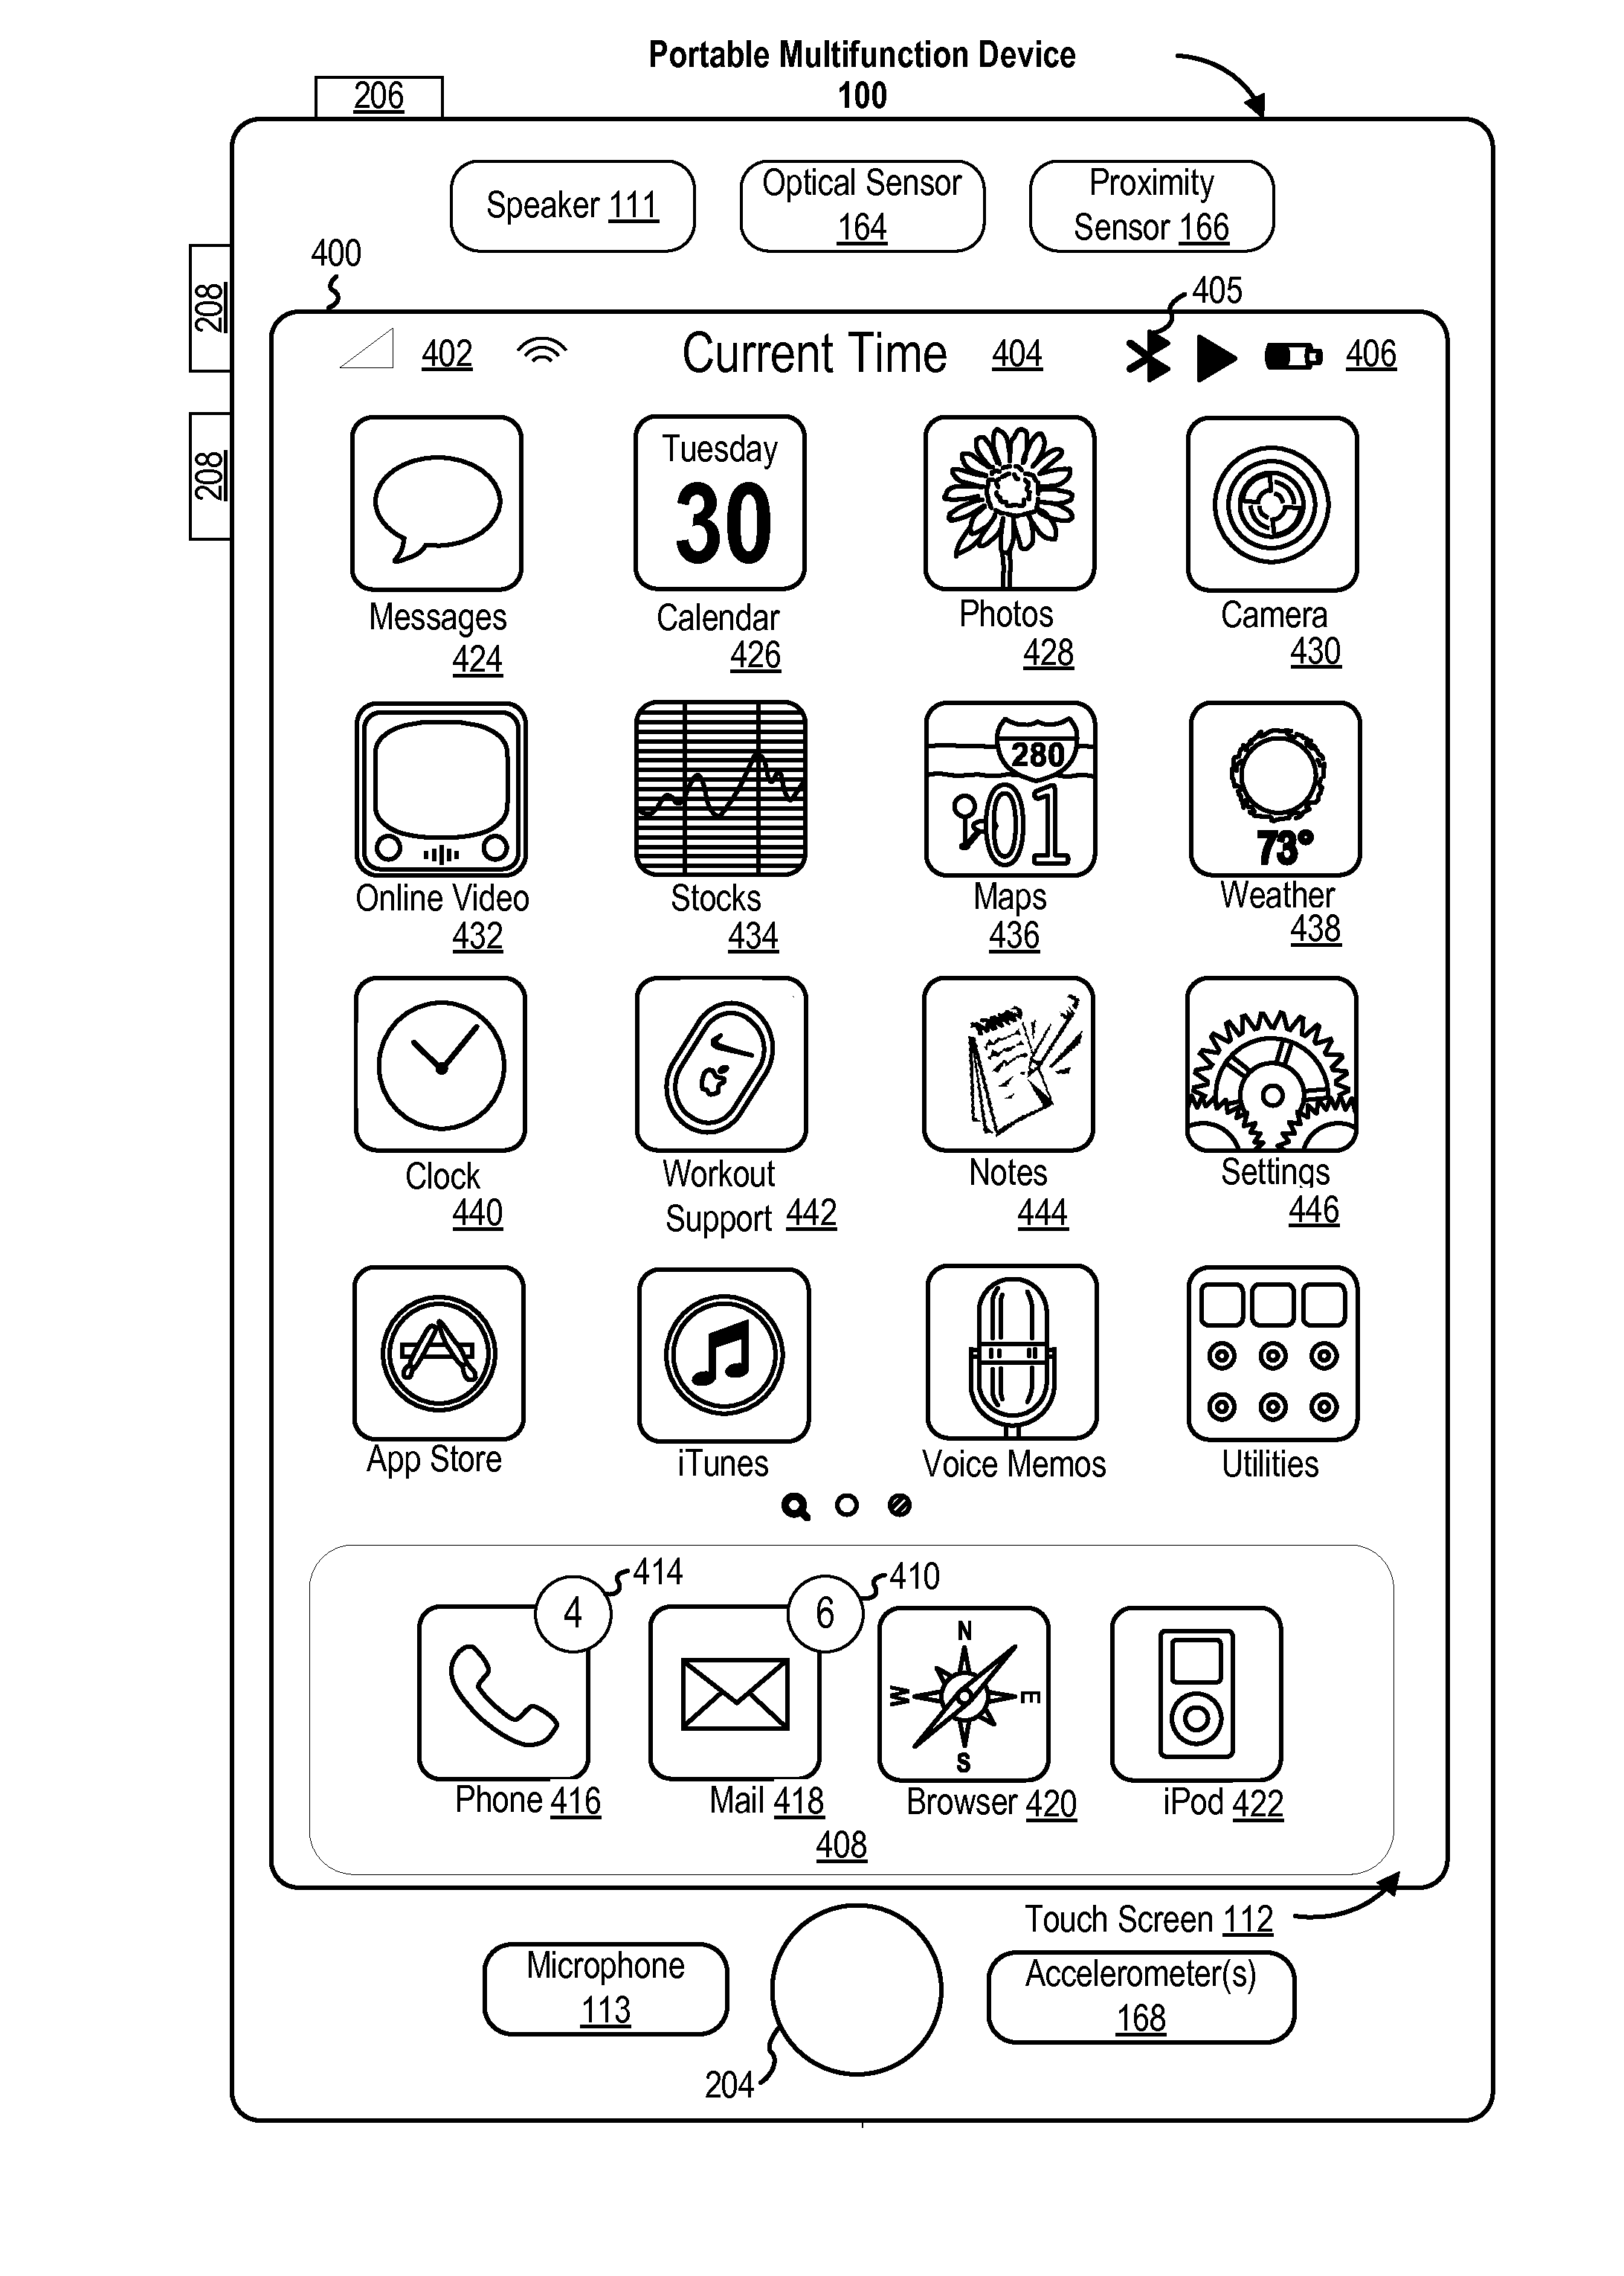 Condition-based activation of a user interface